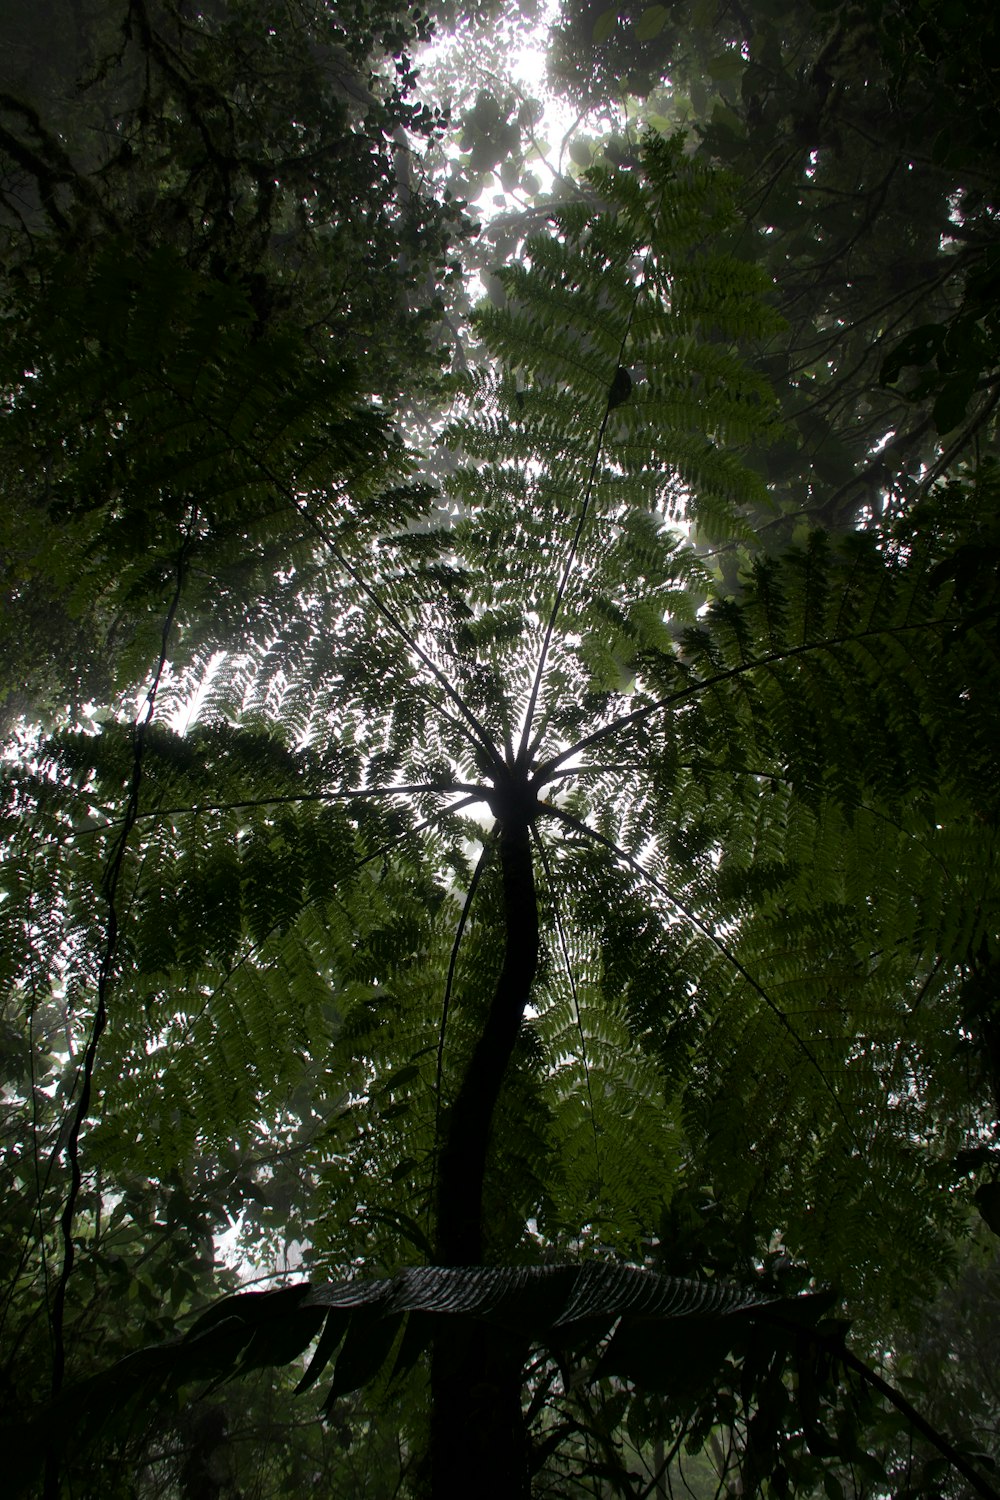 looking up into the canopy of a tree in a forest